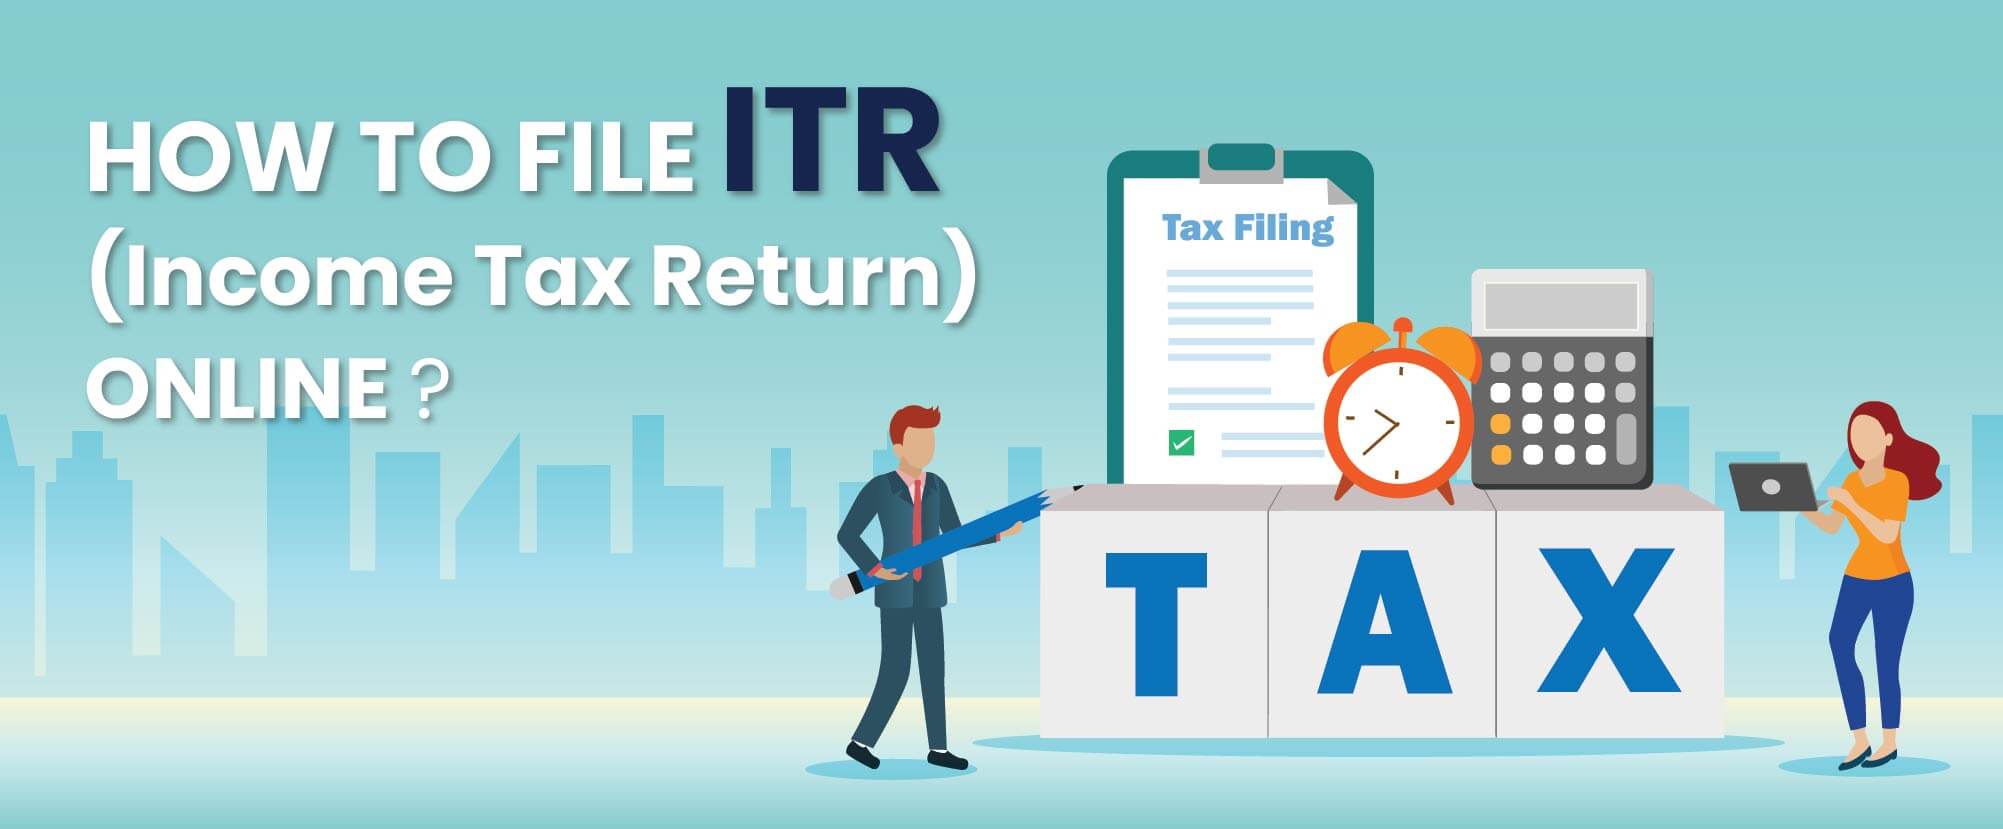 how-to-file-itr-complete-guide-to-file-income-tax-returns-online